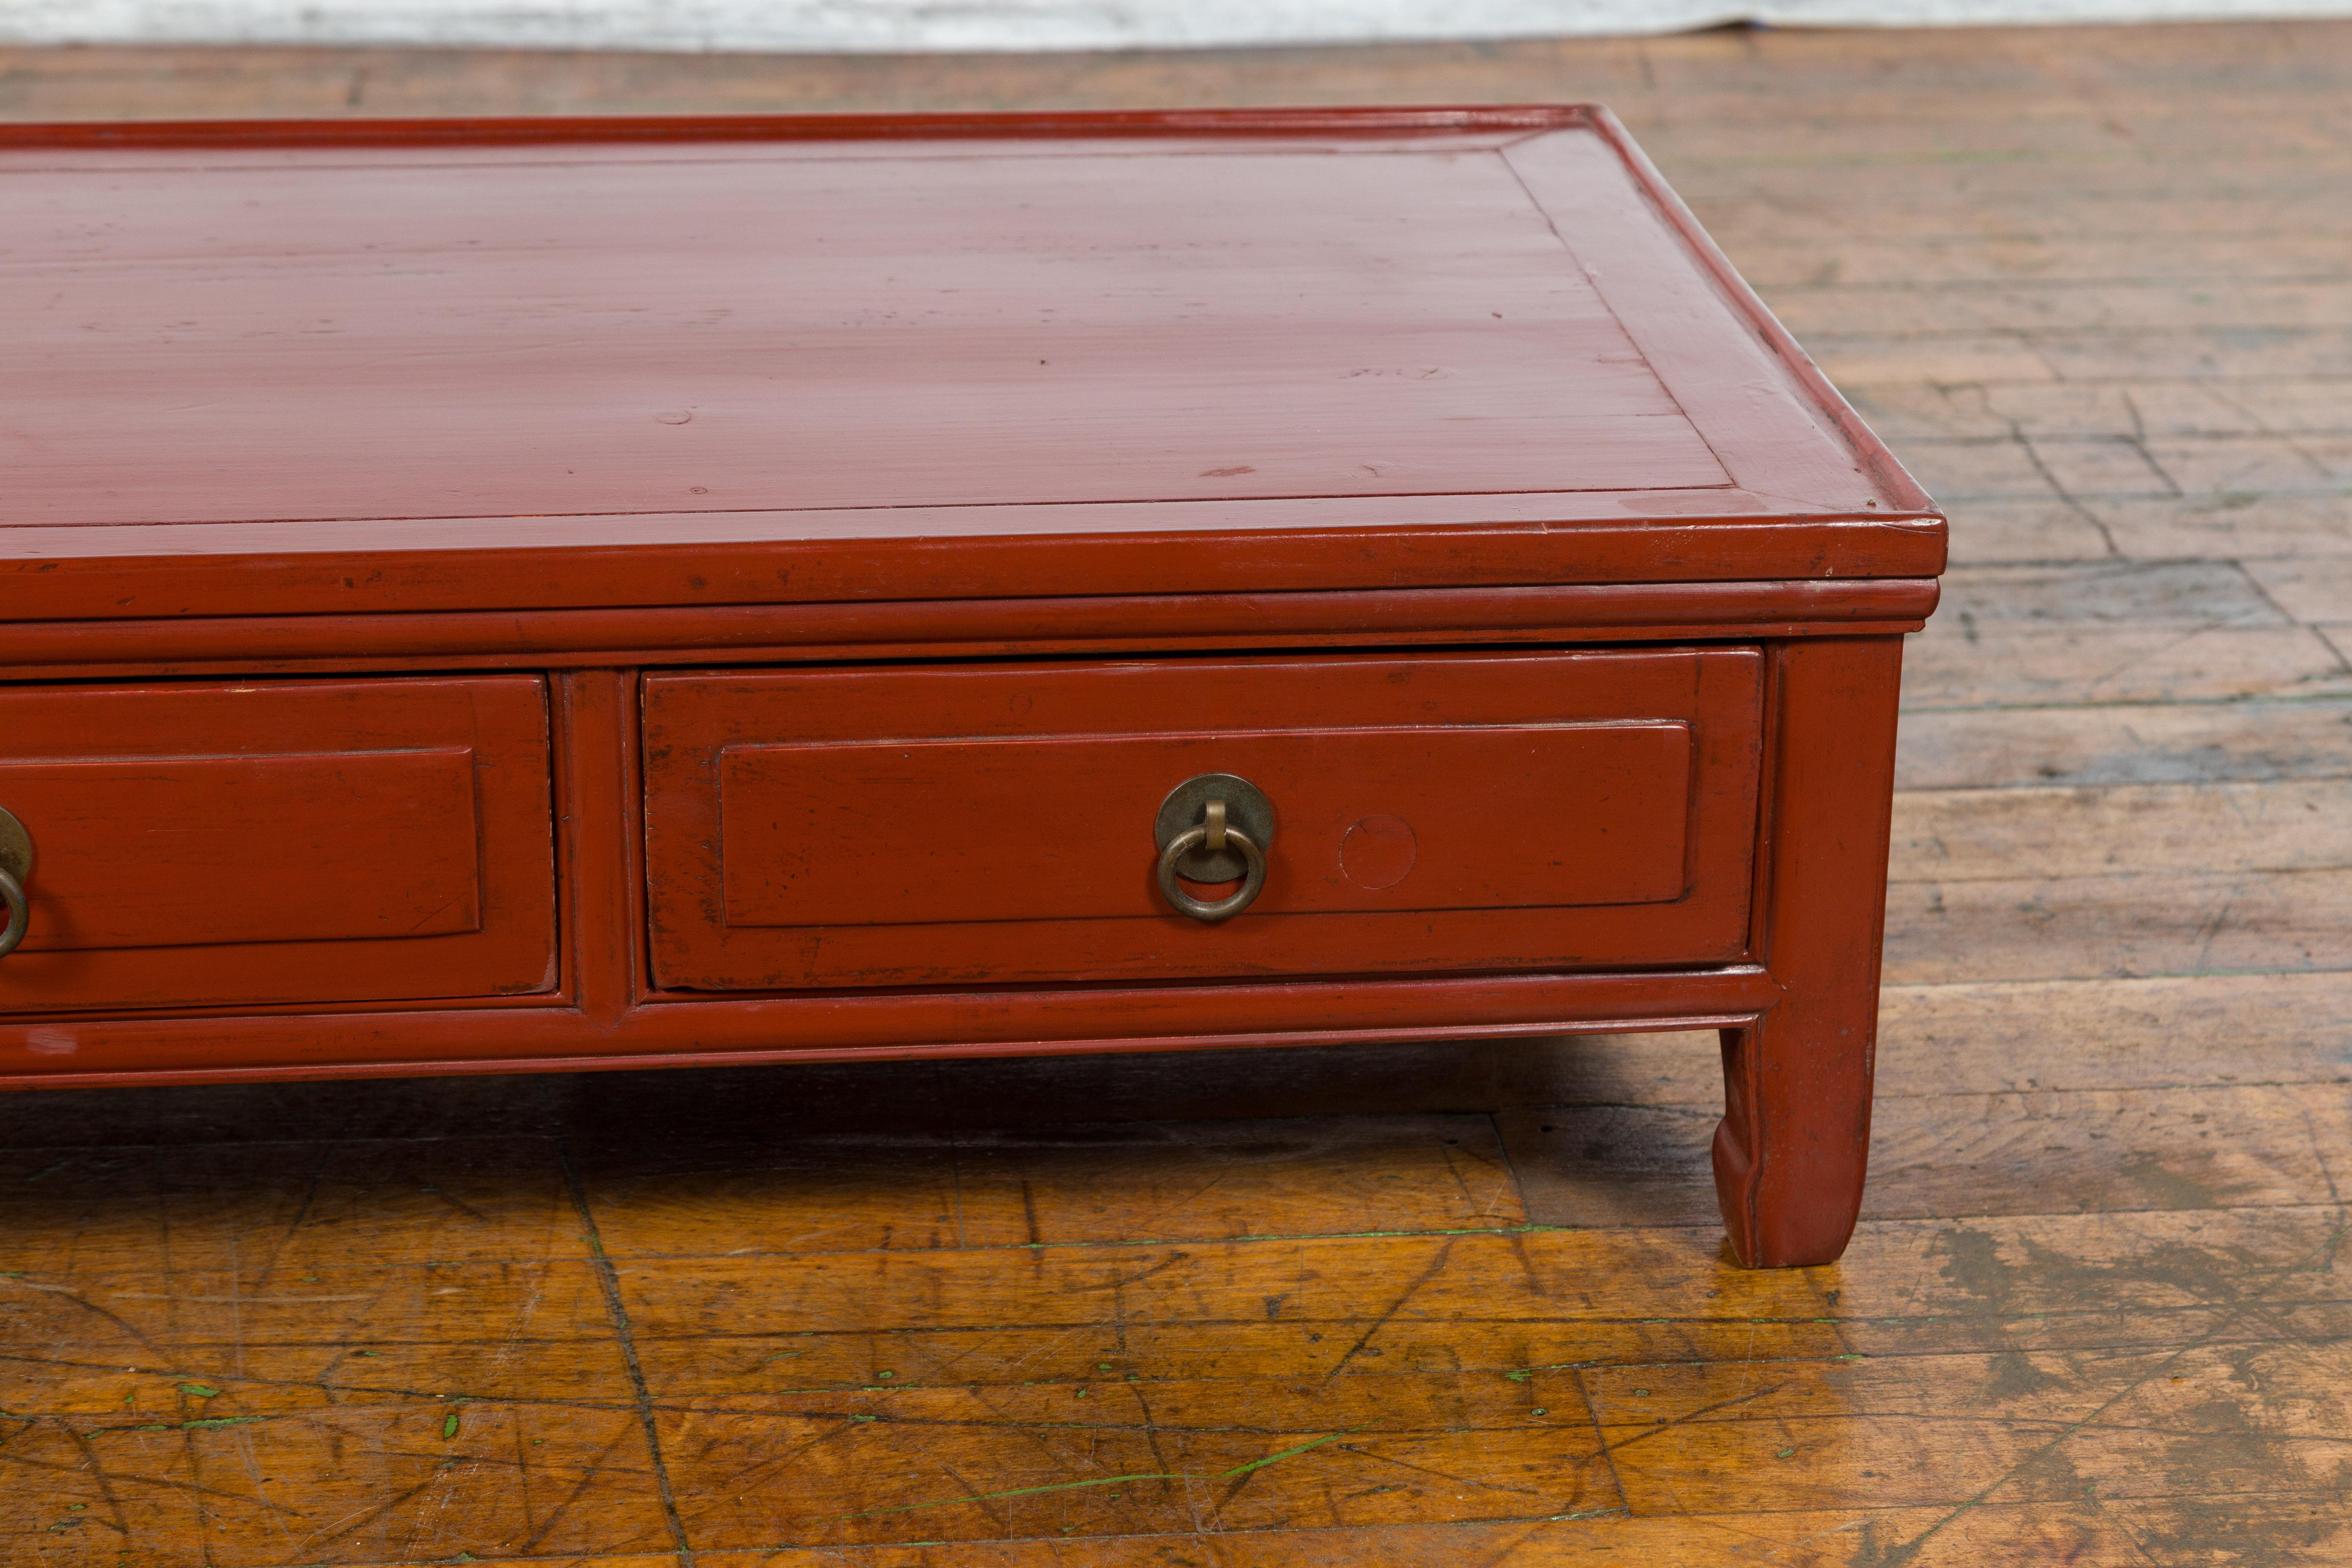 Qing Dynasty Red Lacquer Low Kang Coffee Table with Drawers and Horse Hoof Feet In Good Condition For Sale In Yonkers, NY